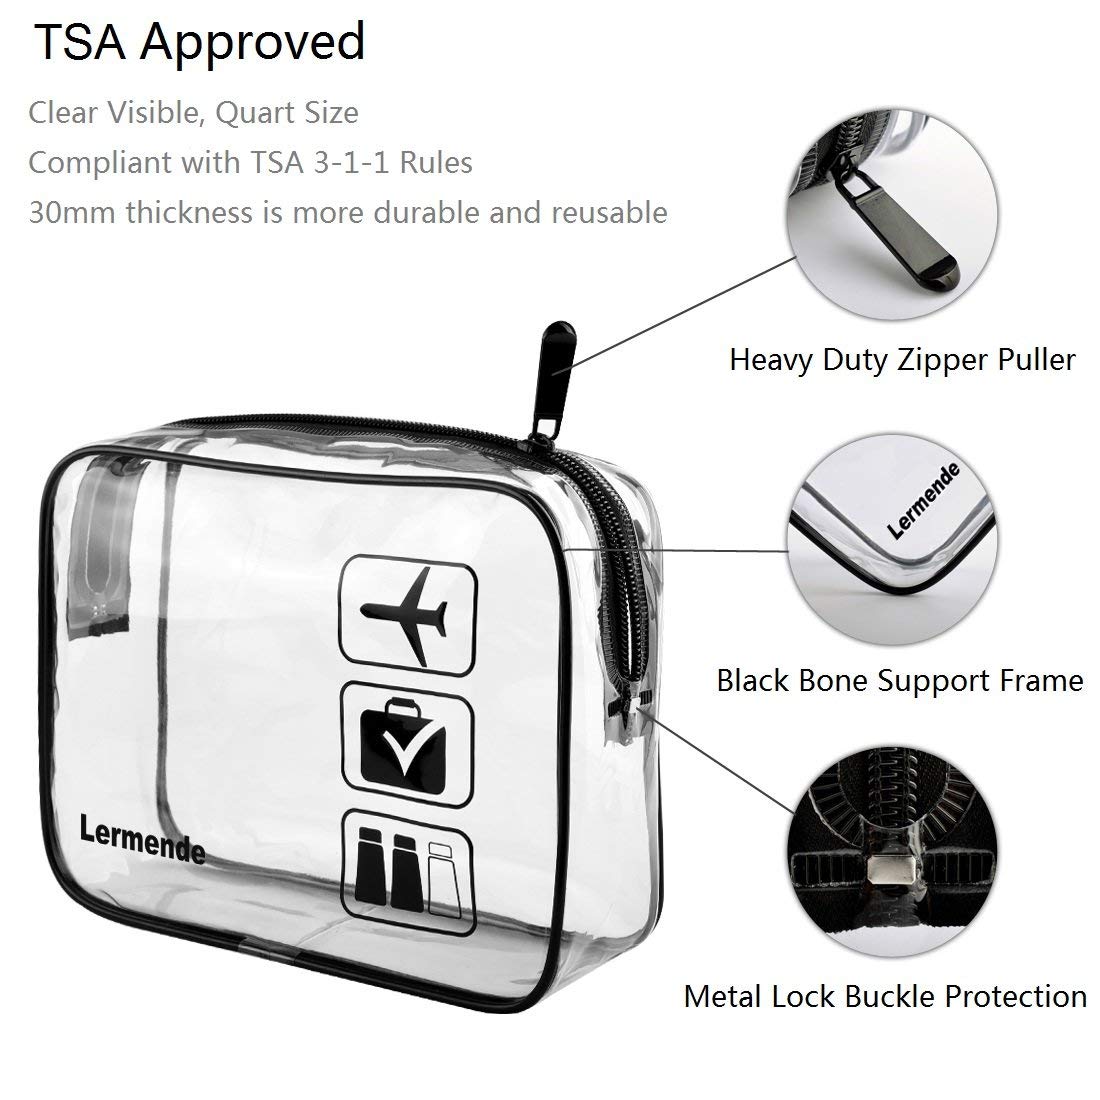 Lermende 2pcs TSA Approved Toiletry Bag Clear Toiletry Bag for Traveling,Airport Airline Travel Toiletry Bag.Carry On TSA Bag,Clear Bag for Travel,Quart Sized Travel Toiletry bag for Women Men (Black)